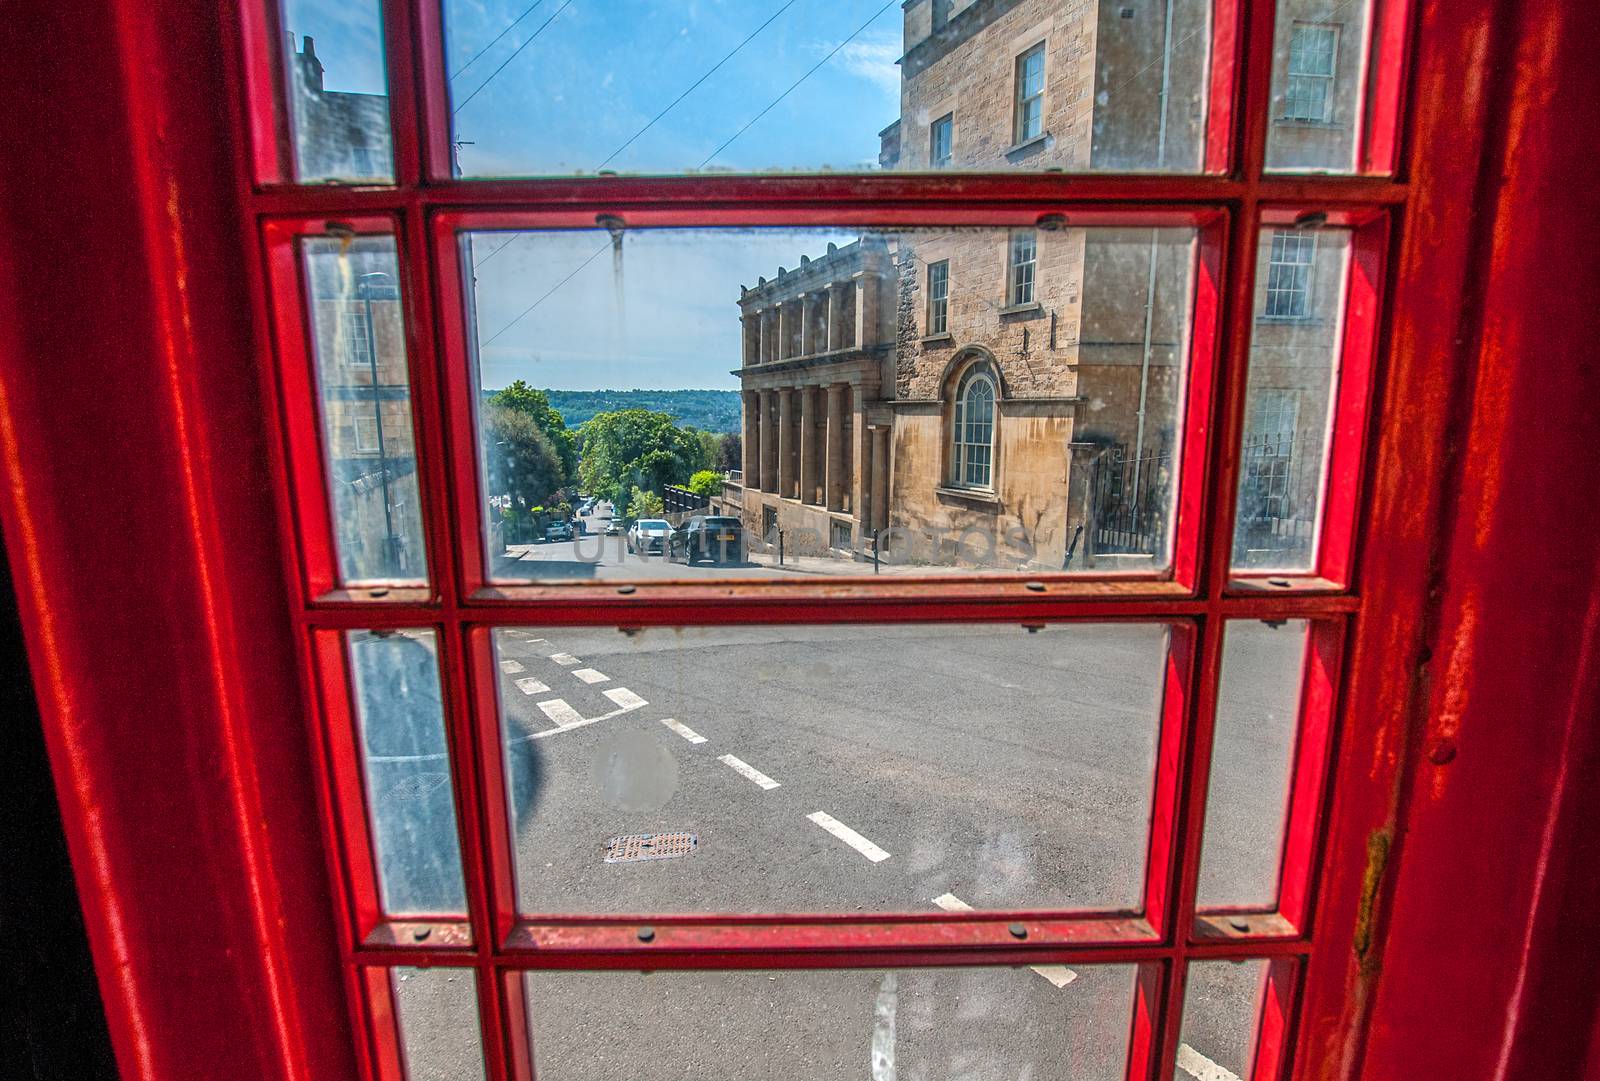 looking out from inside of a red phone box in the sion hill area of bath england by sirspread